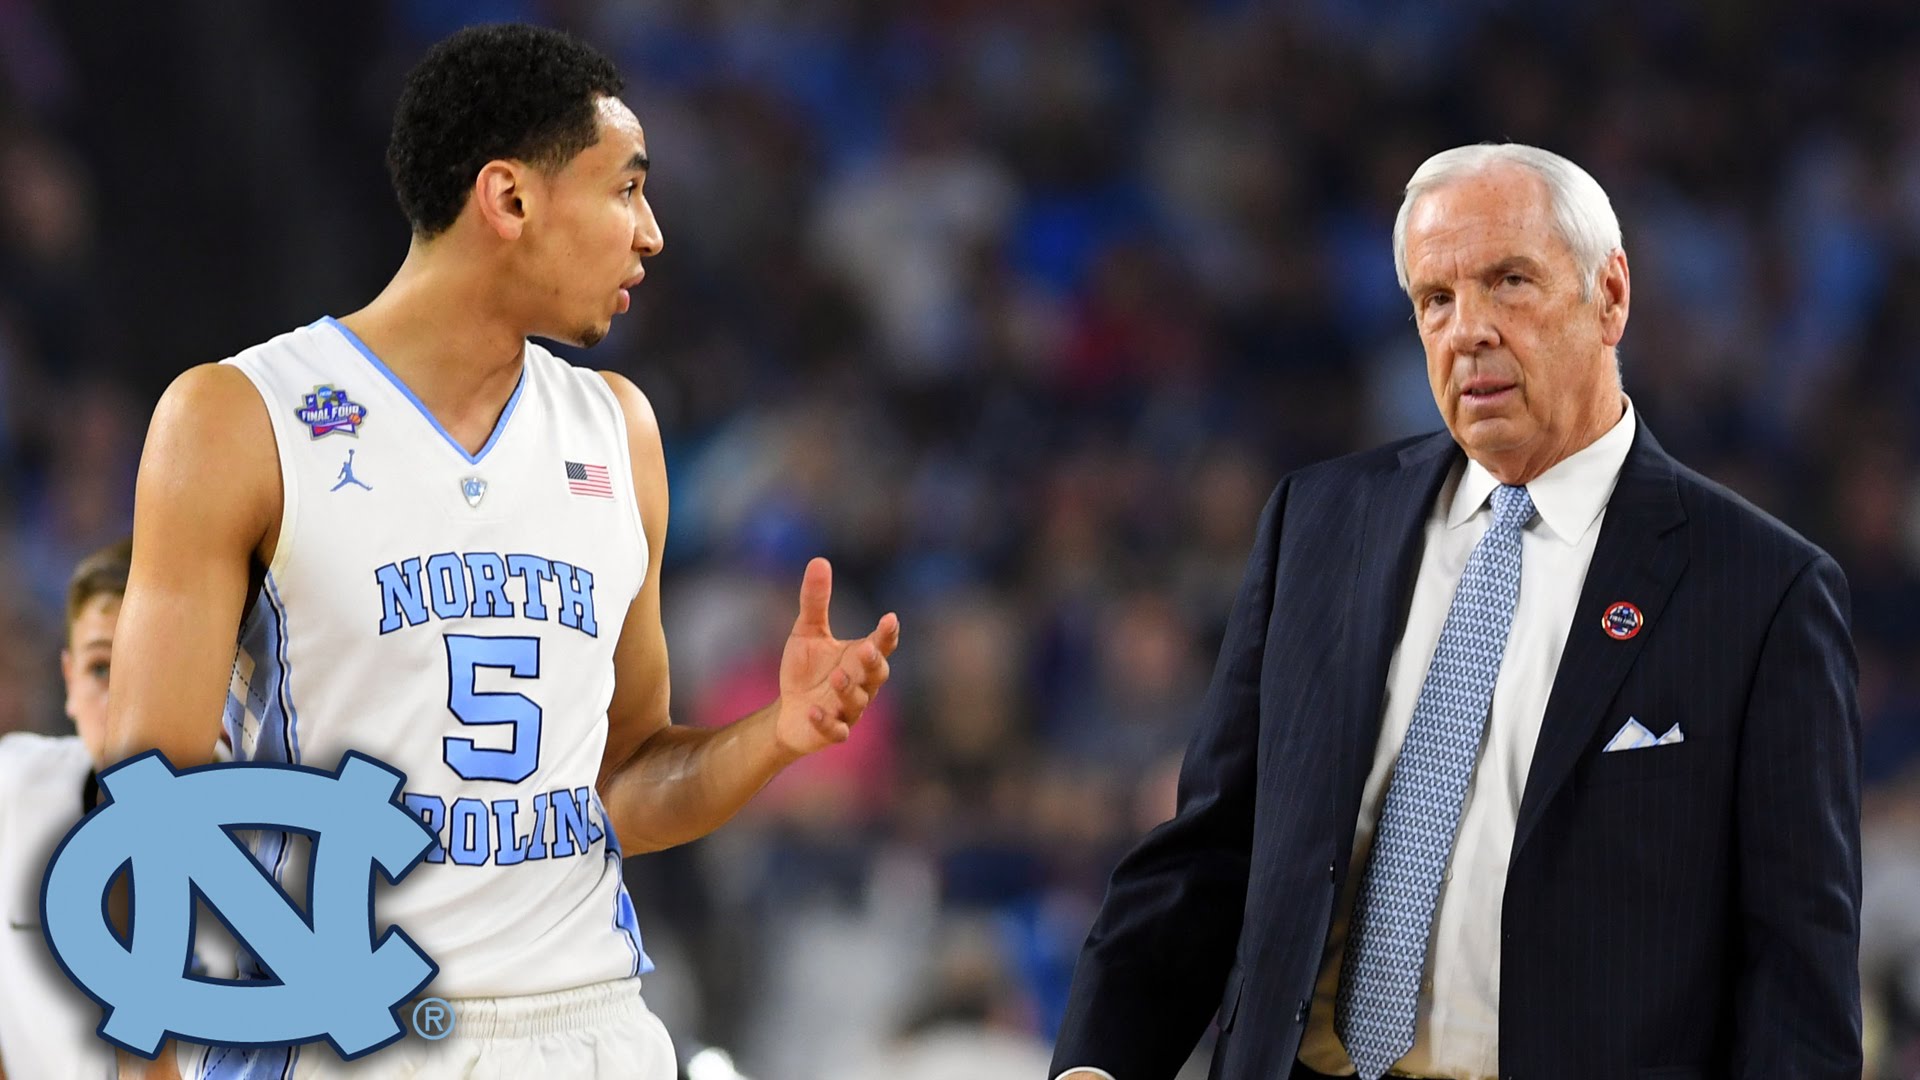 North Carolina coach Roy Williams emotional in post game press conference